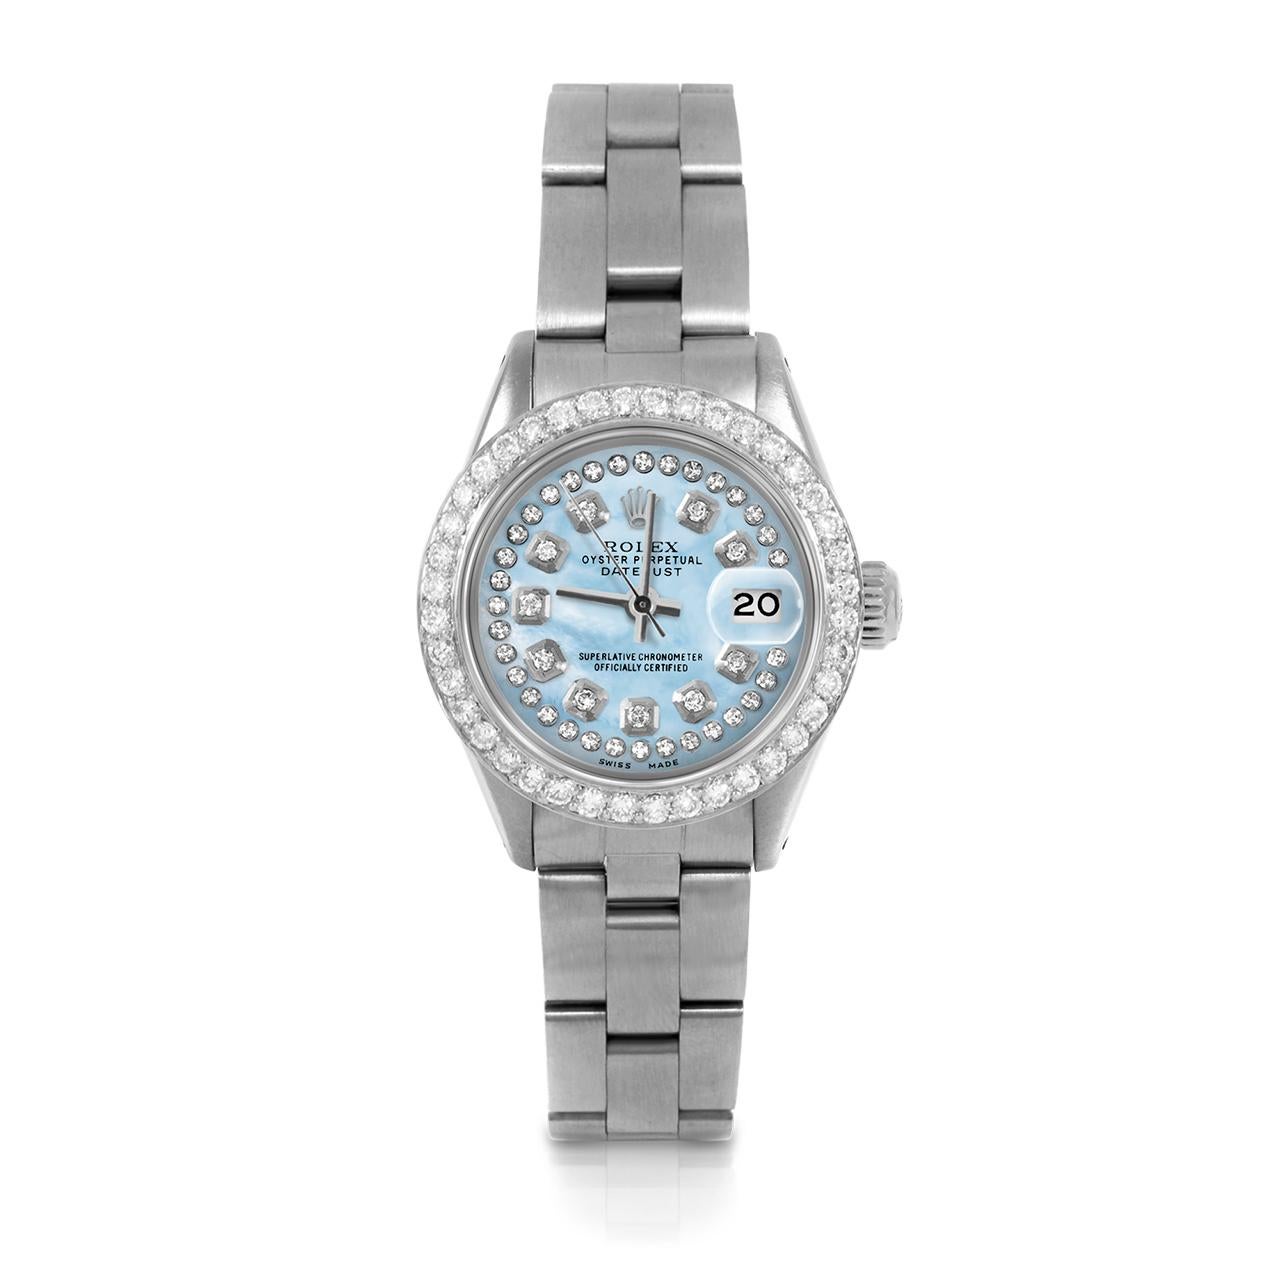 Pre-Owned Rolex 6917 Ladies 26mm Datejust Watch, Custom Light Blue Mother of Pearl String Diamond Dial & Custom 1ct Diamond Bezel on Rolex Stainless Steel Oyster Band.   

SKU 6917-SS-LBMOP-STRD-BDS-OYS


Brand/Model:        Rolex Datejust
Model